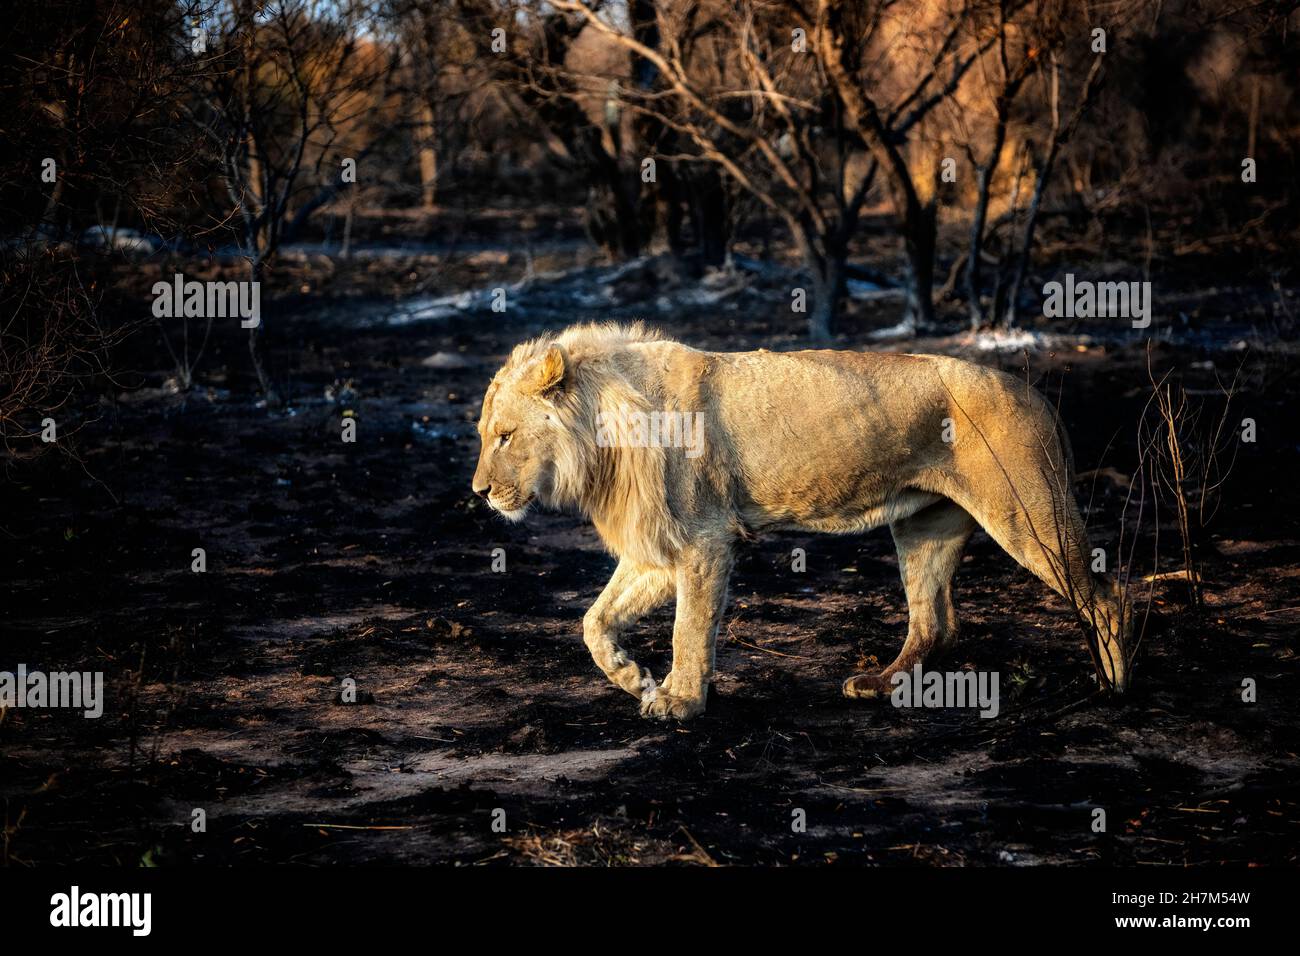 Young Male Lion walking through a Burned Forest Stock Photo